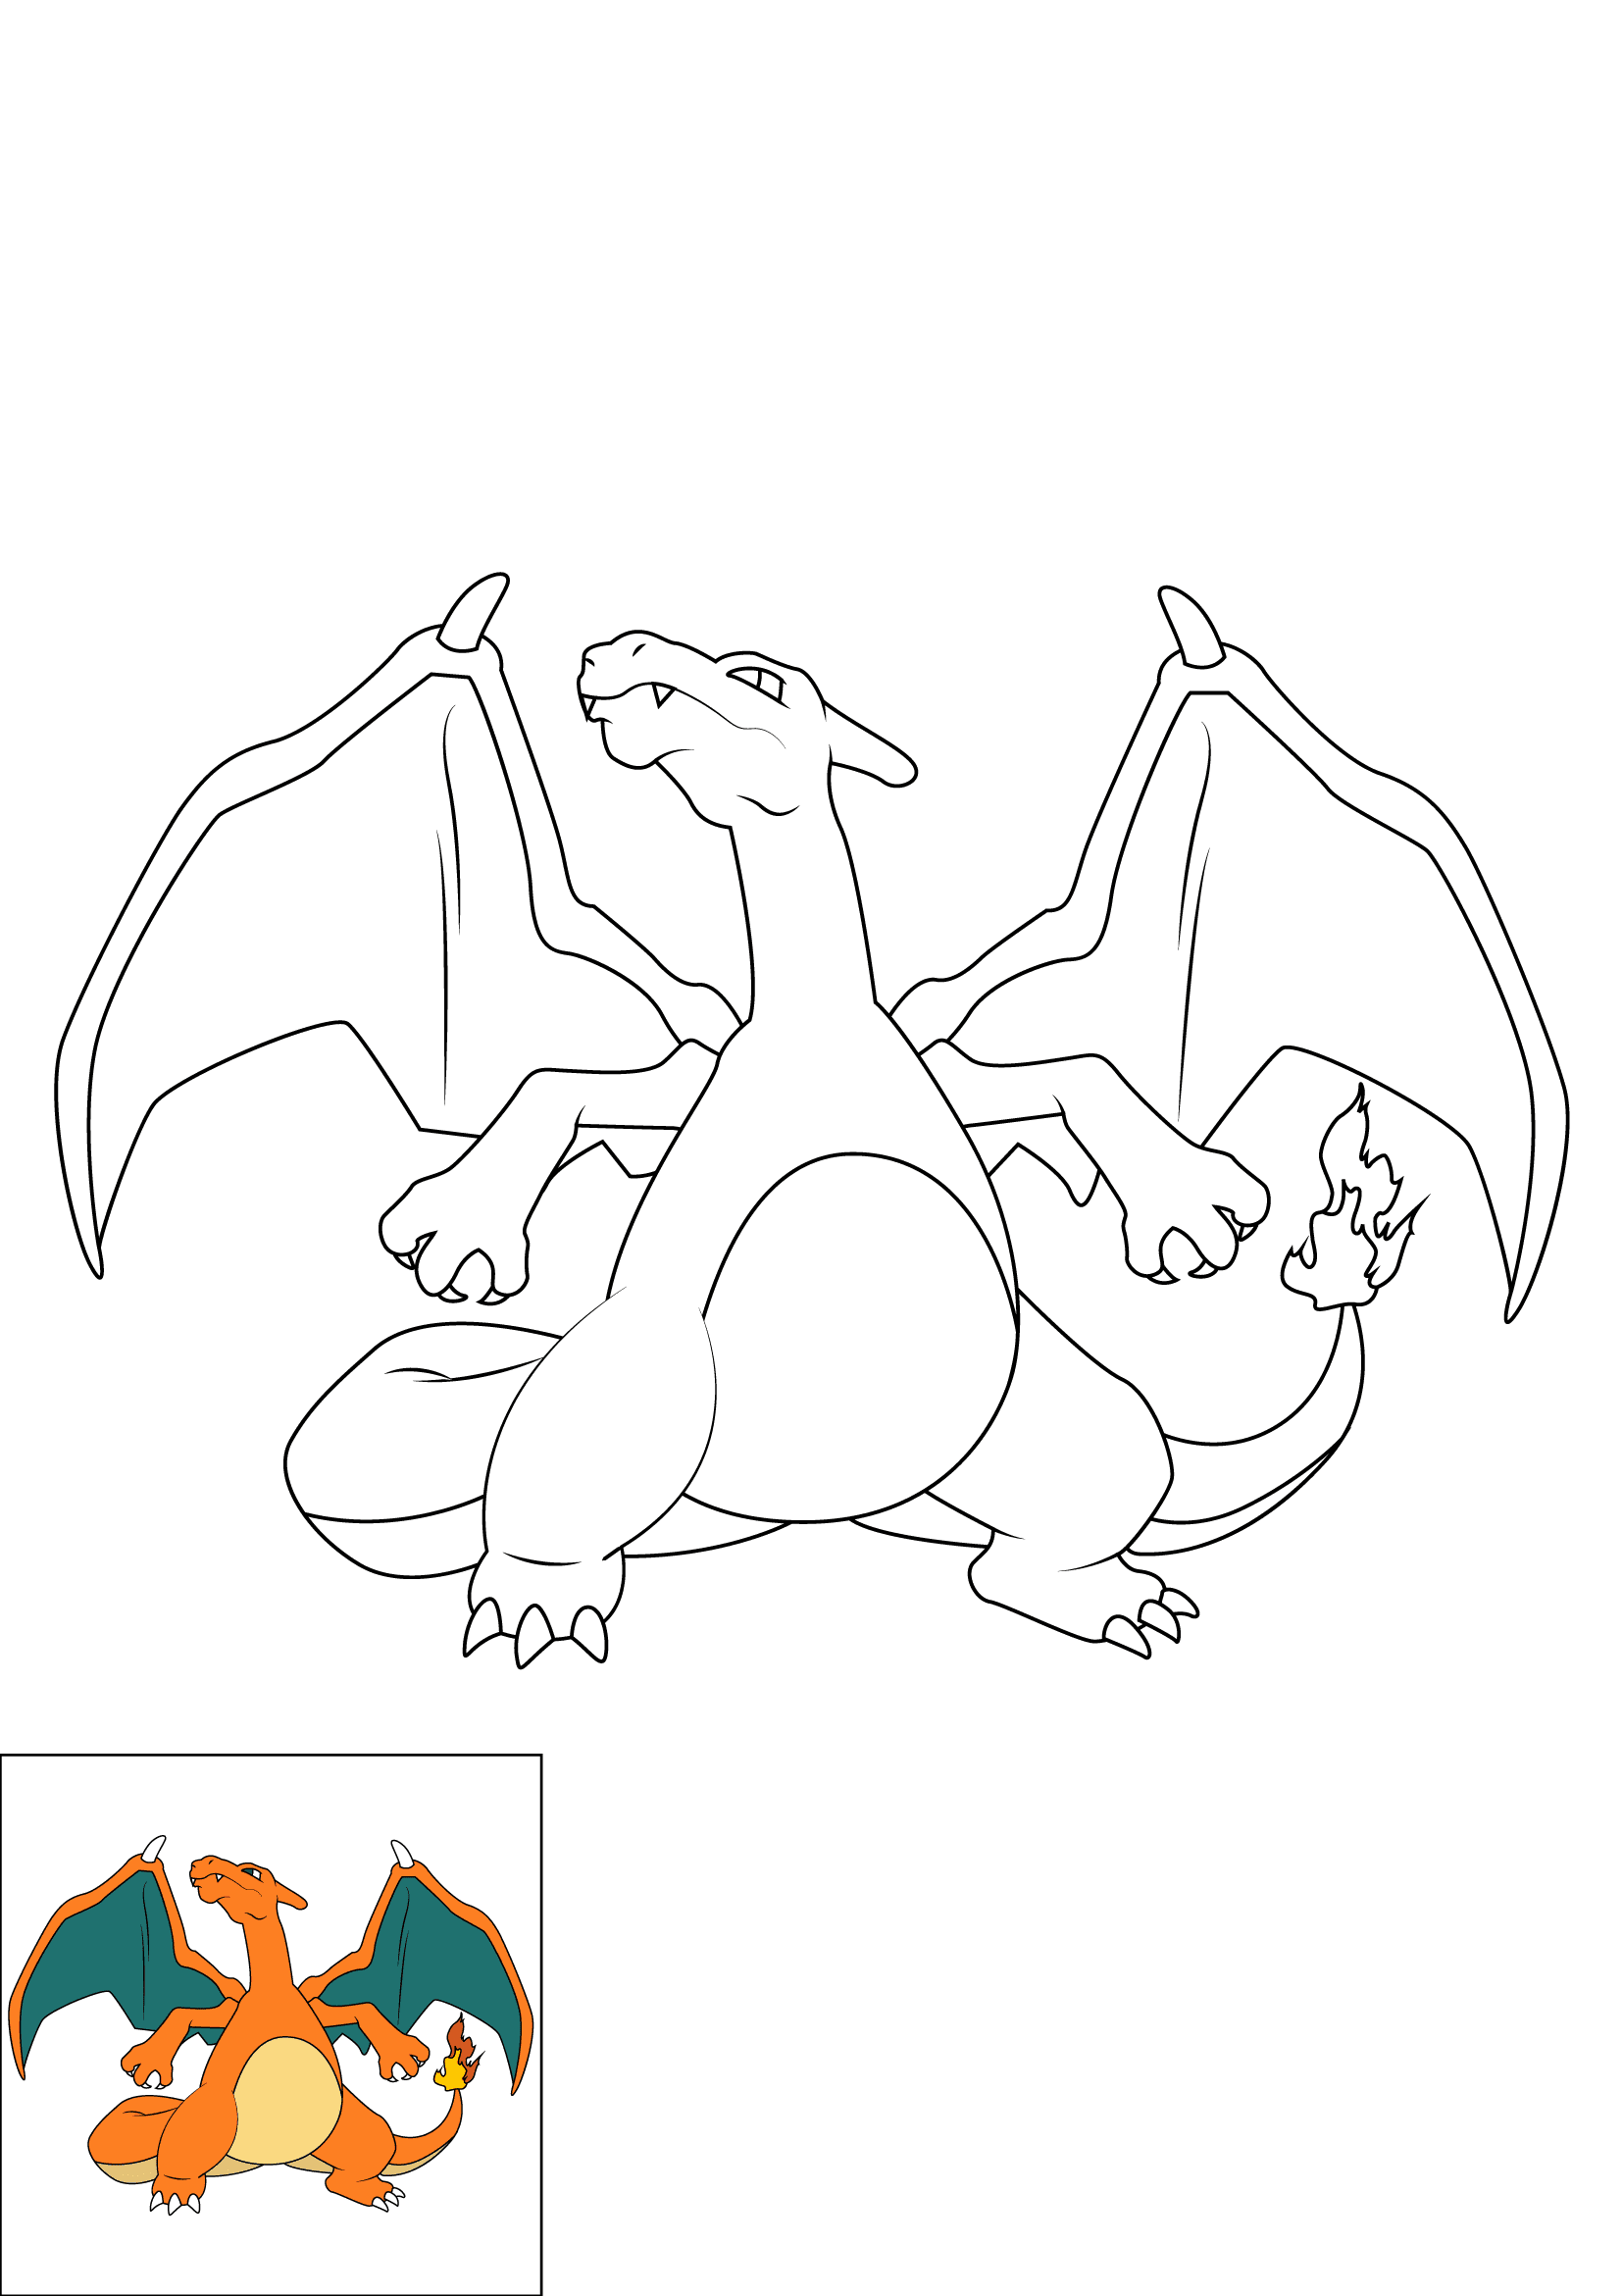 How to Draw Charizard Step by Step Printable Color